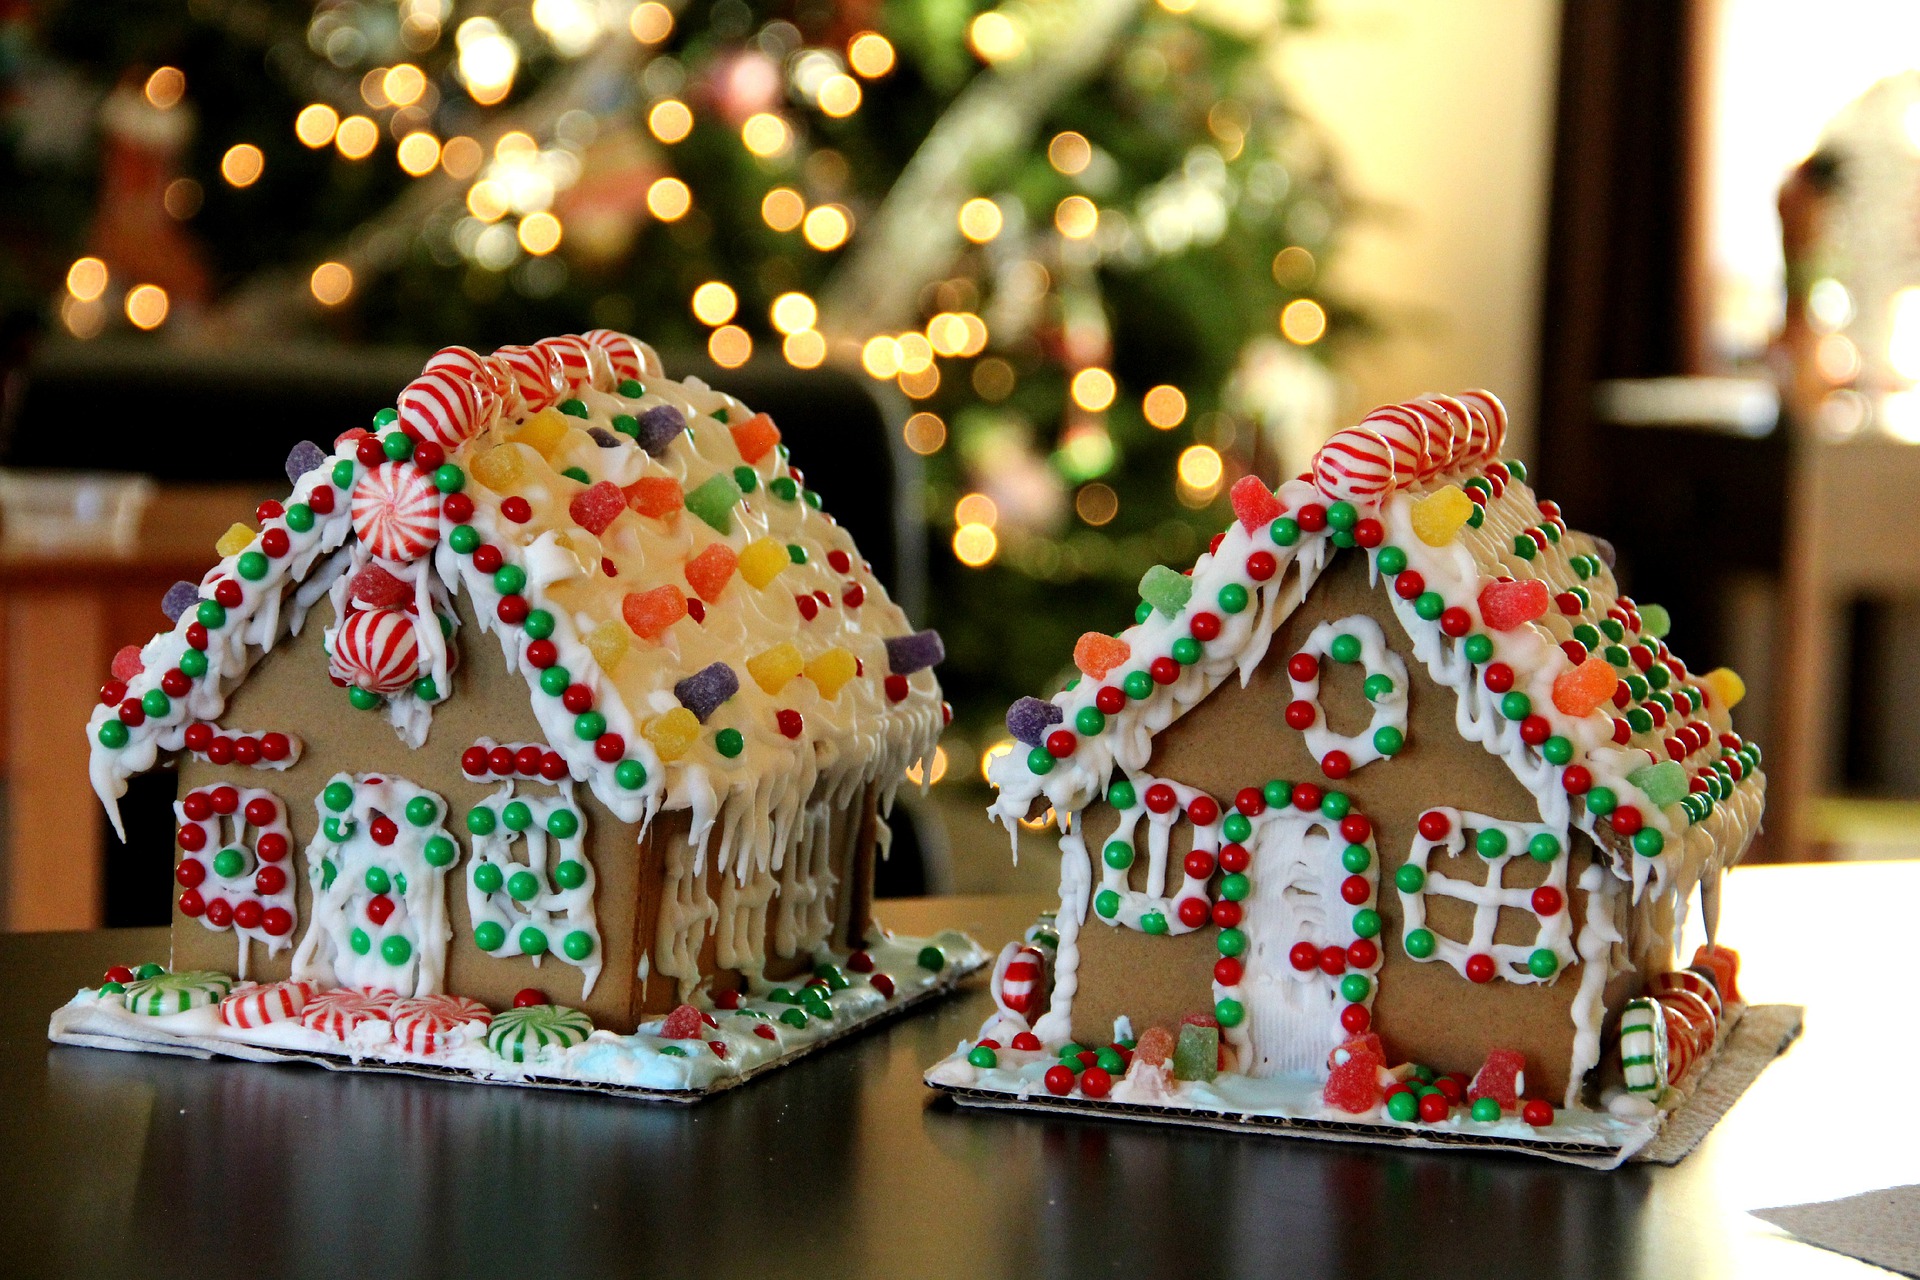 Gingerbread houses photo by Kris from Pixabay